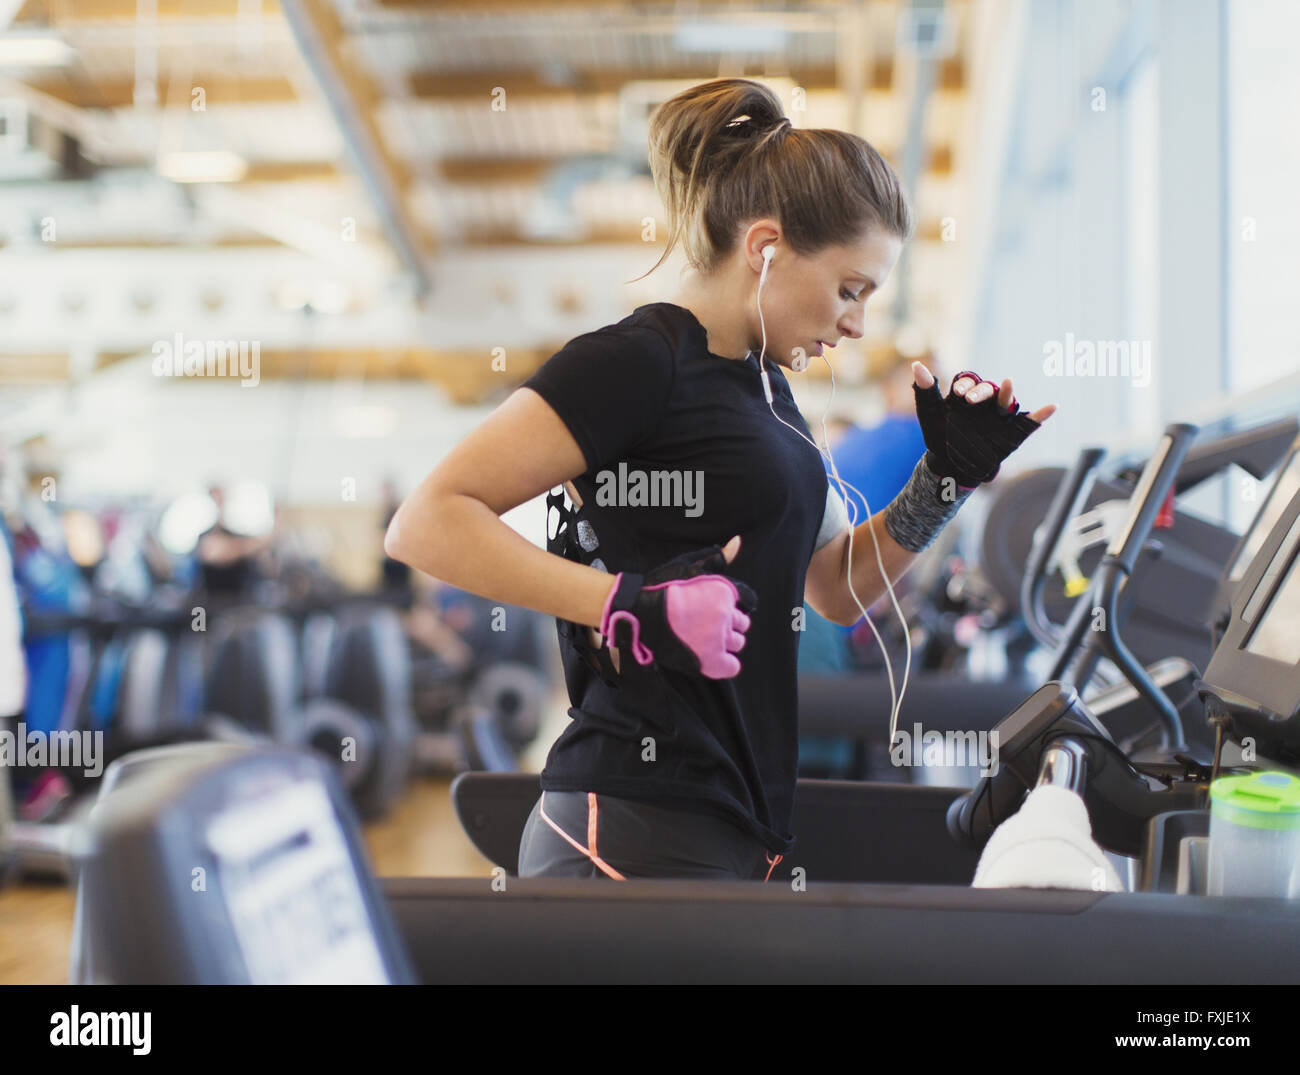 Woman running on treadmill at gym with headphones Stock Photo